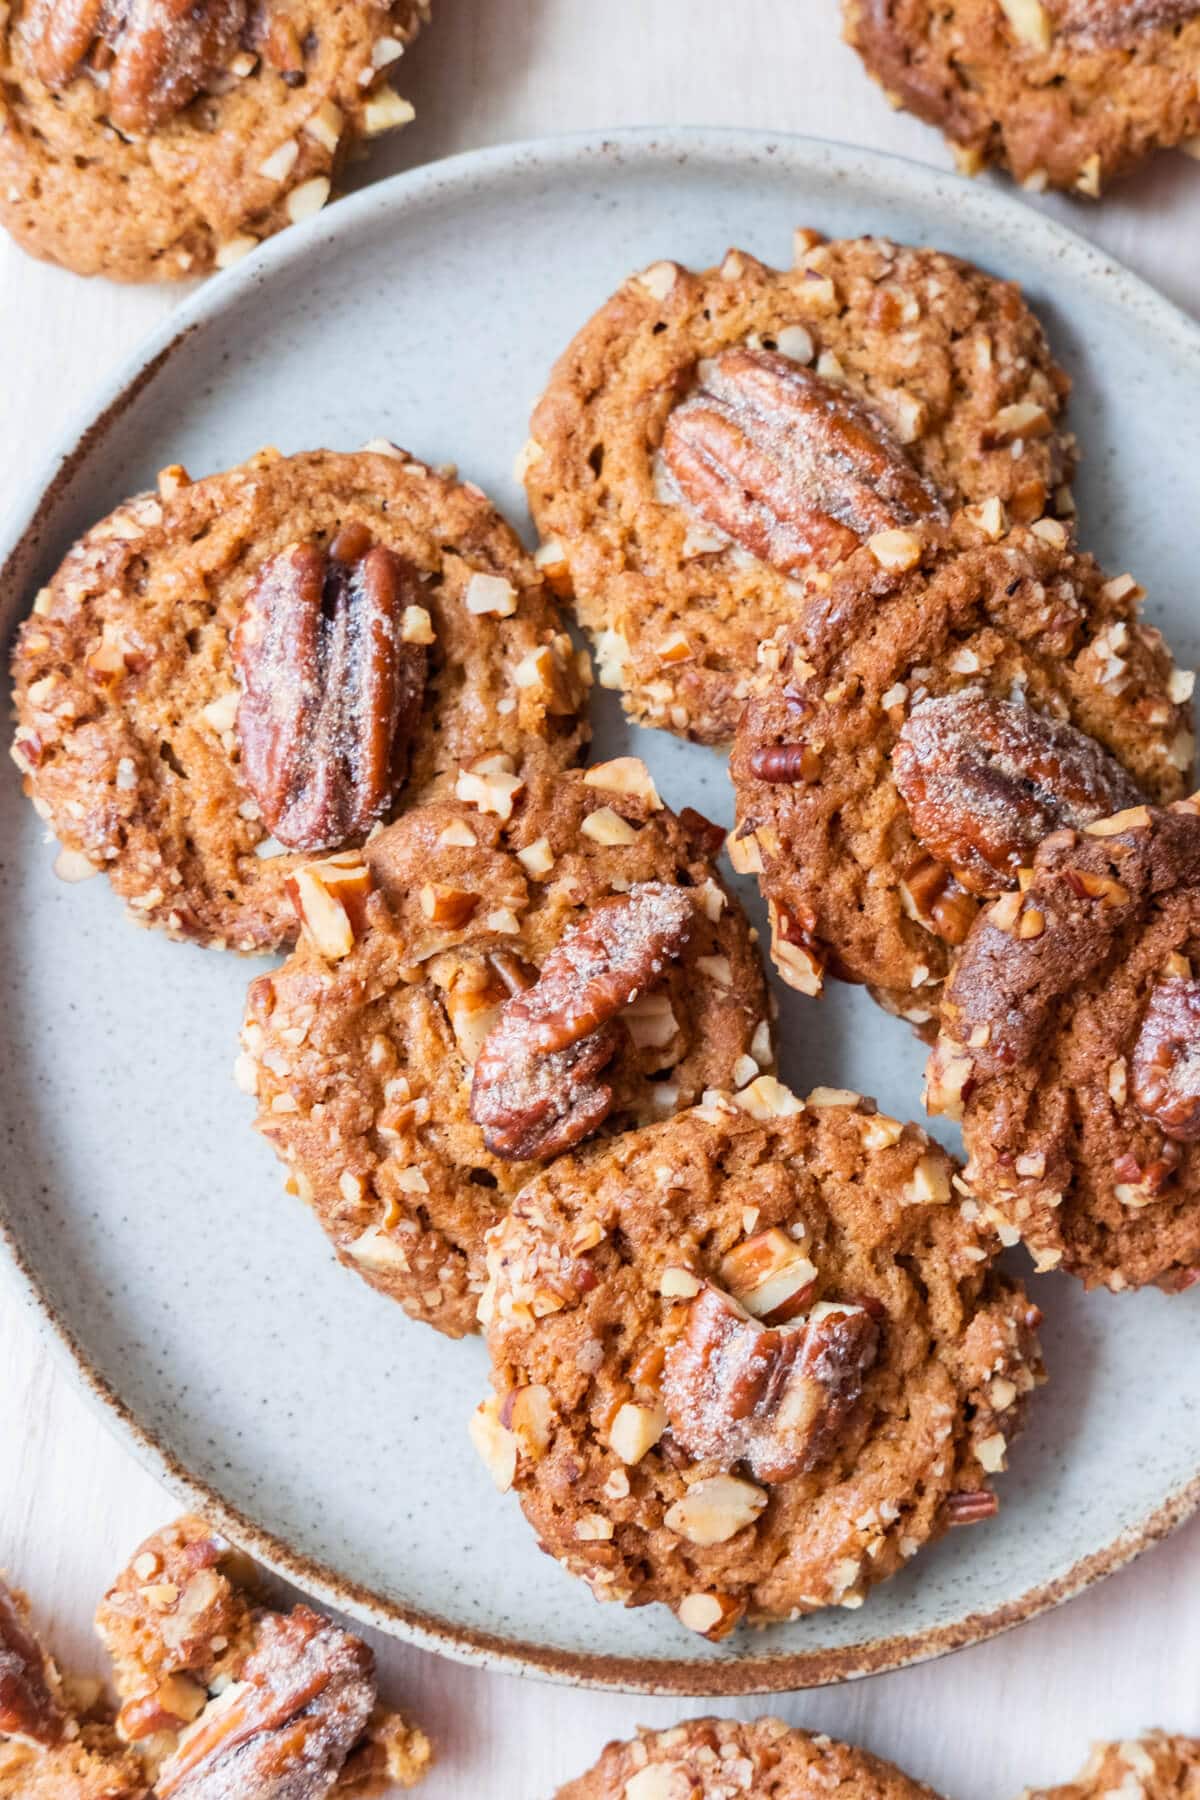 Butter pecan cookies loaded with chopped pecans and topped with pecan halves.